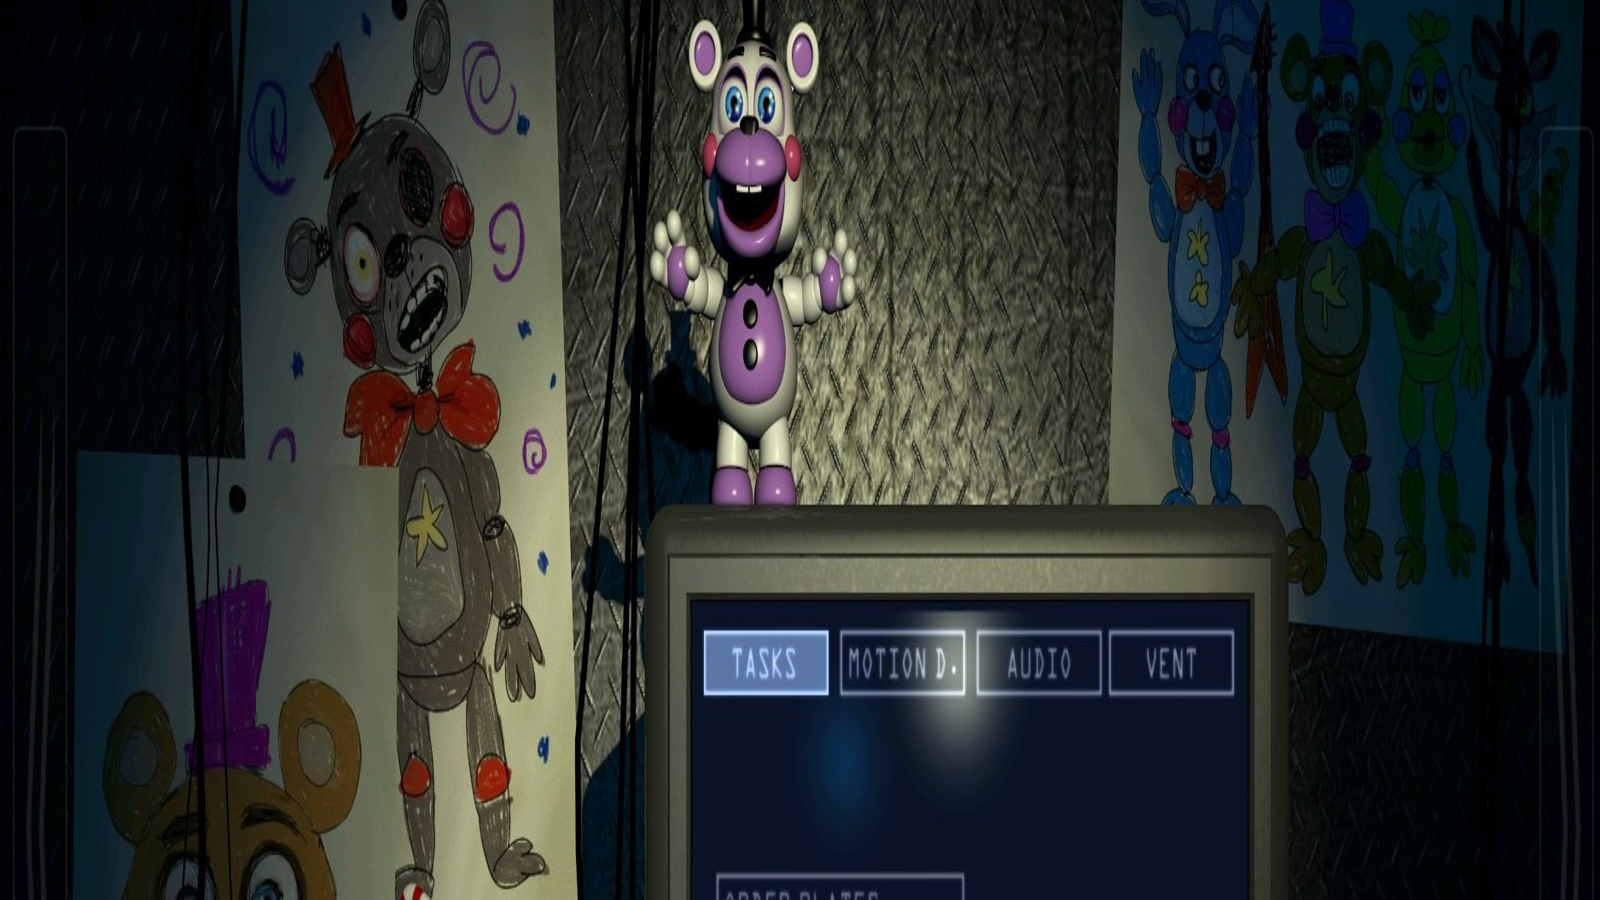 FNaF 6: Pizzeria Simulator for Android